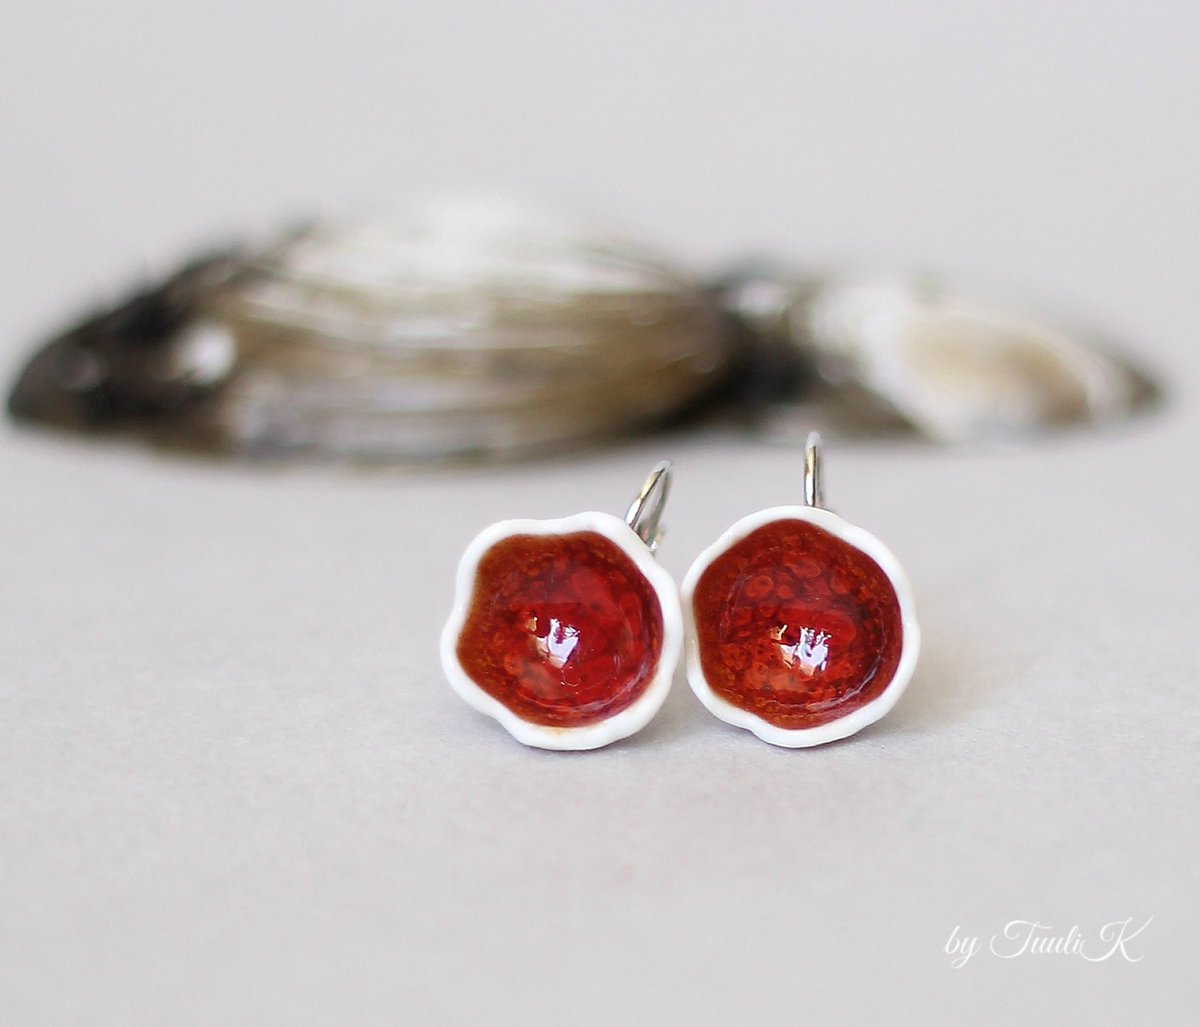 Great news! You can find unique porcelain earrings on 10% SALE 24-28. June 2018. You are welcome to my Etsy shop. etsy.com/shop/TuuliK 
#sale #porcelainearrings #uniquegifts #buyhandmade #etsyshop #handmade #porcelain